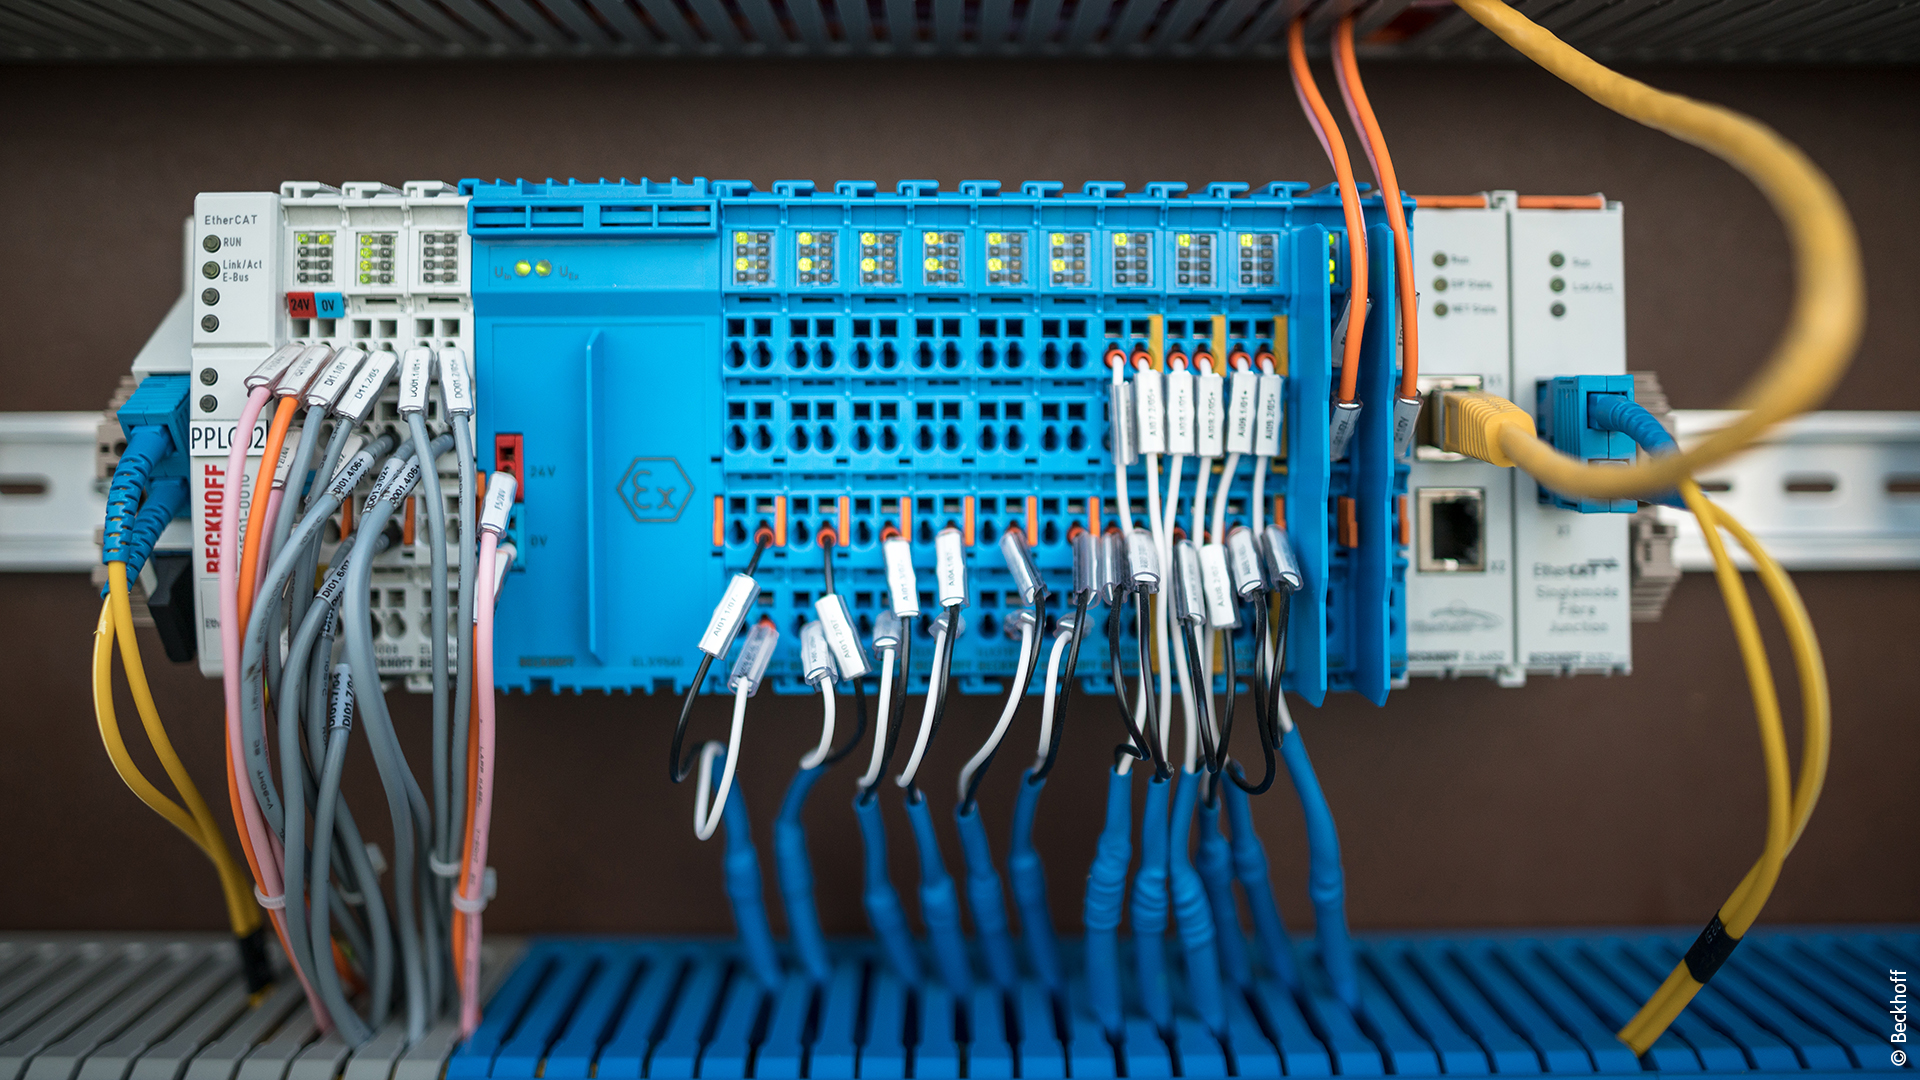 With the intrinsically safe ELX system, the signals can be acquired and processed directly from the hazardous area. By using fiber optic lines with cable redundancy, the extensive plant sections can be reliably automated and from long distances. 